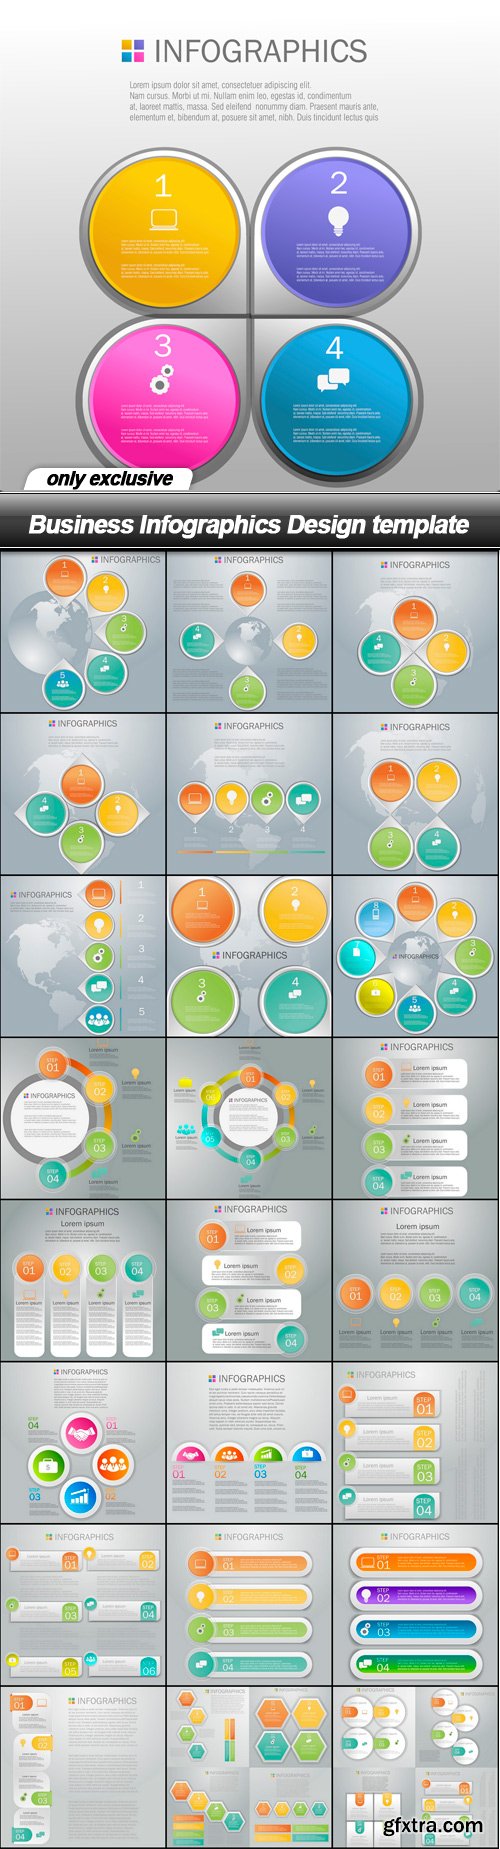 Business Infographics Design template - 25 EPS